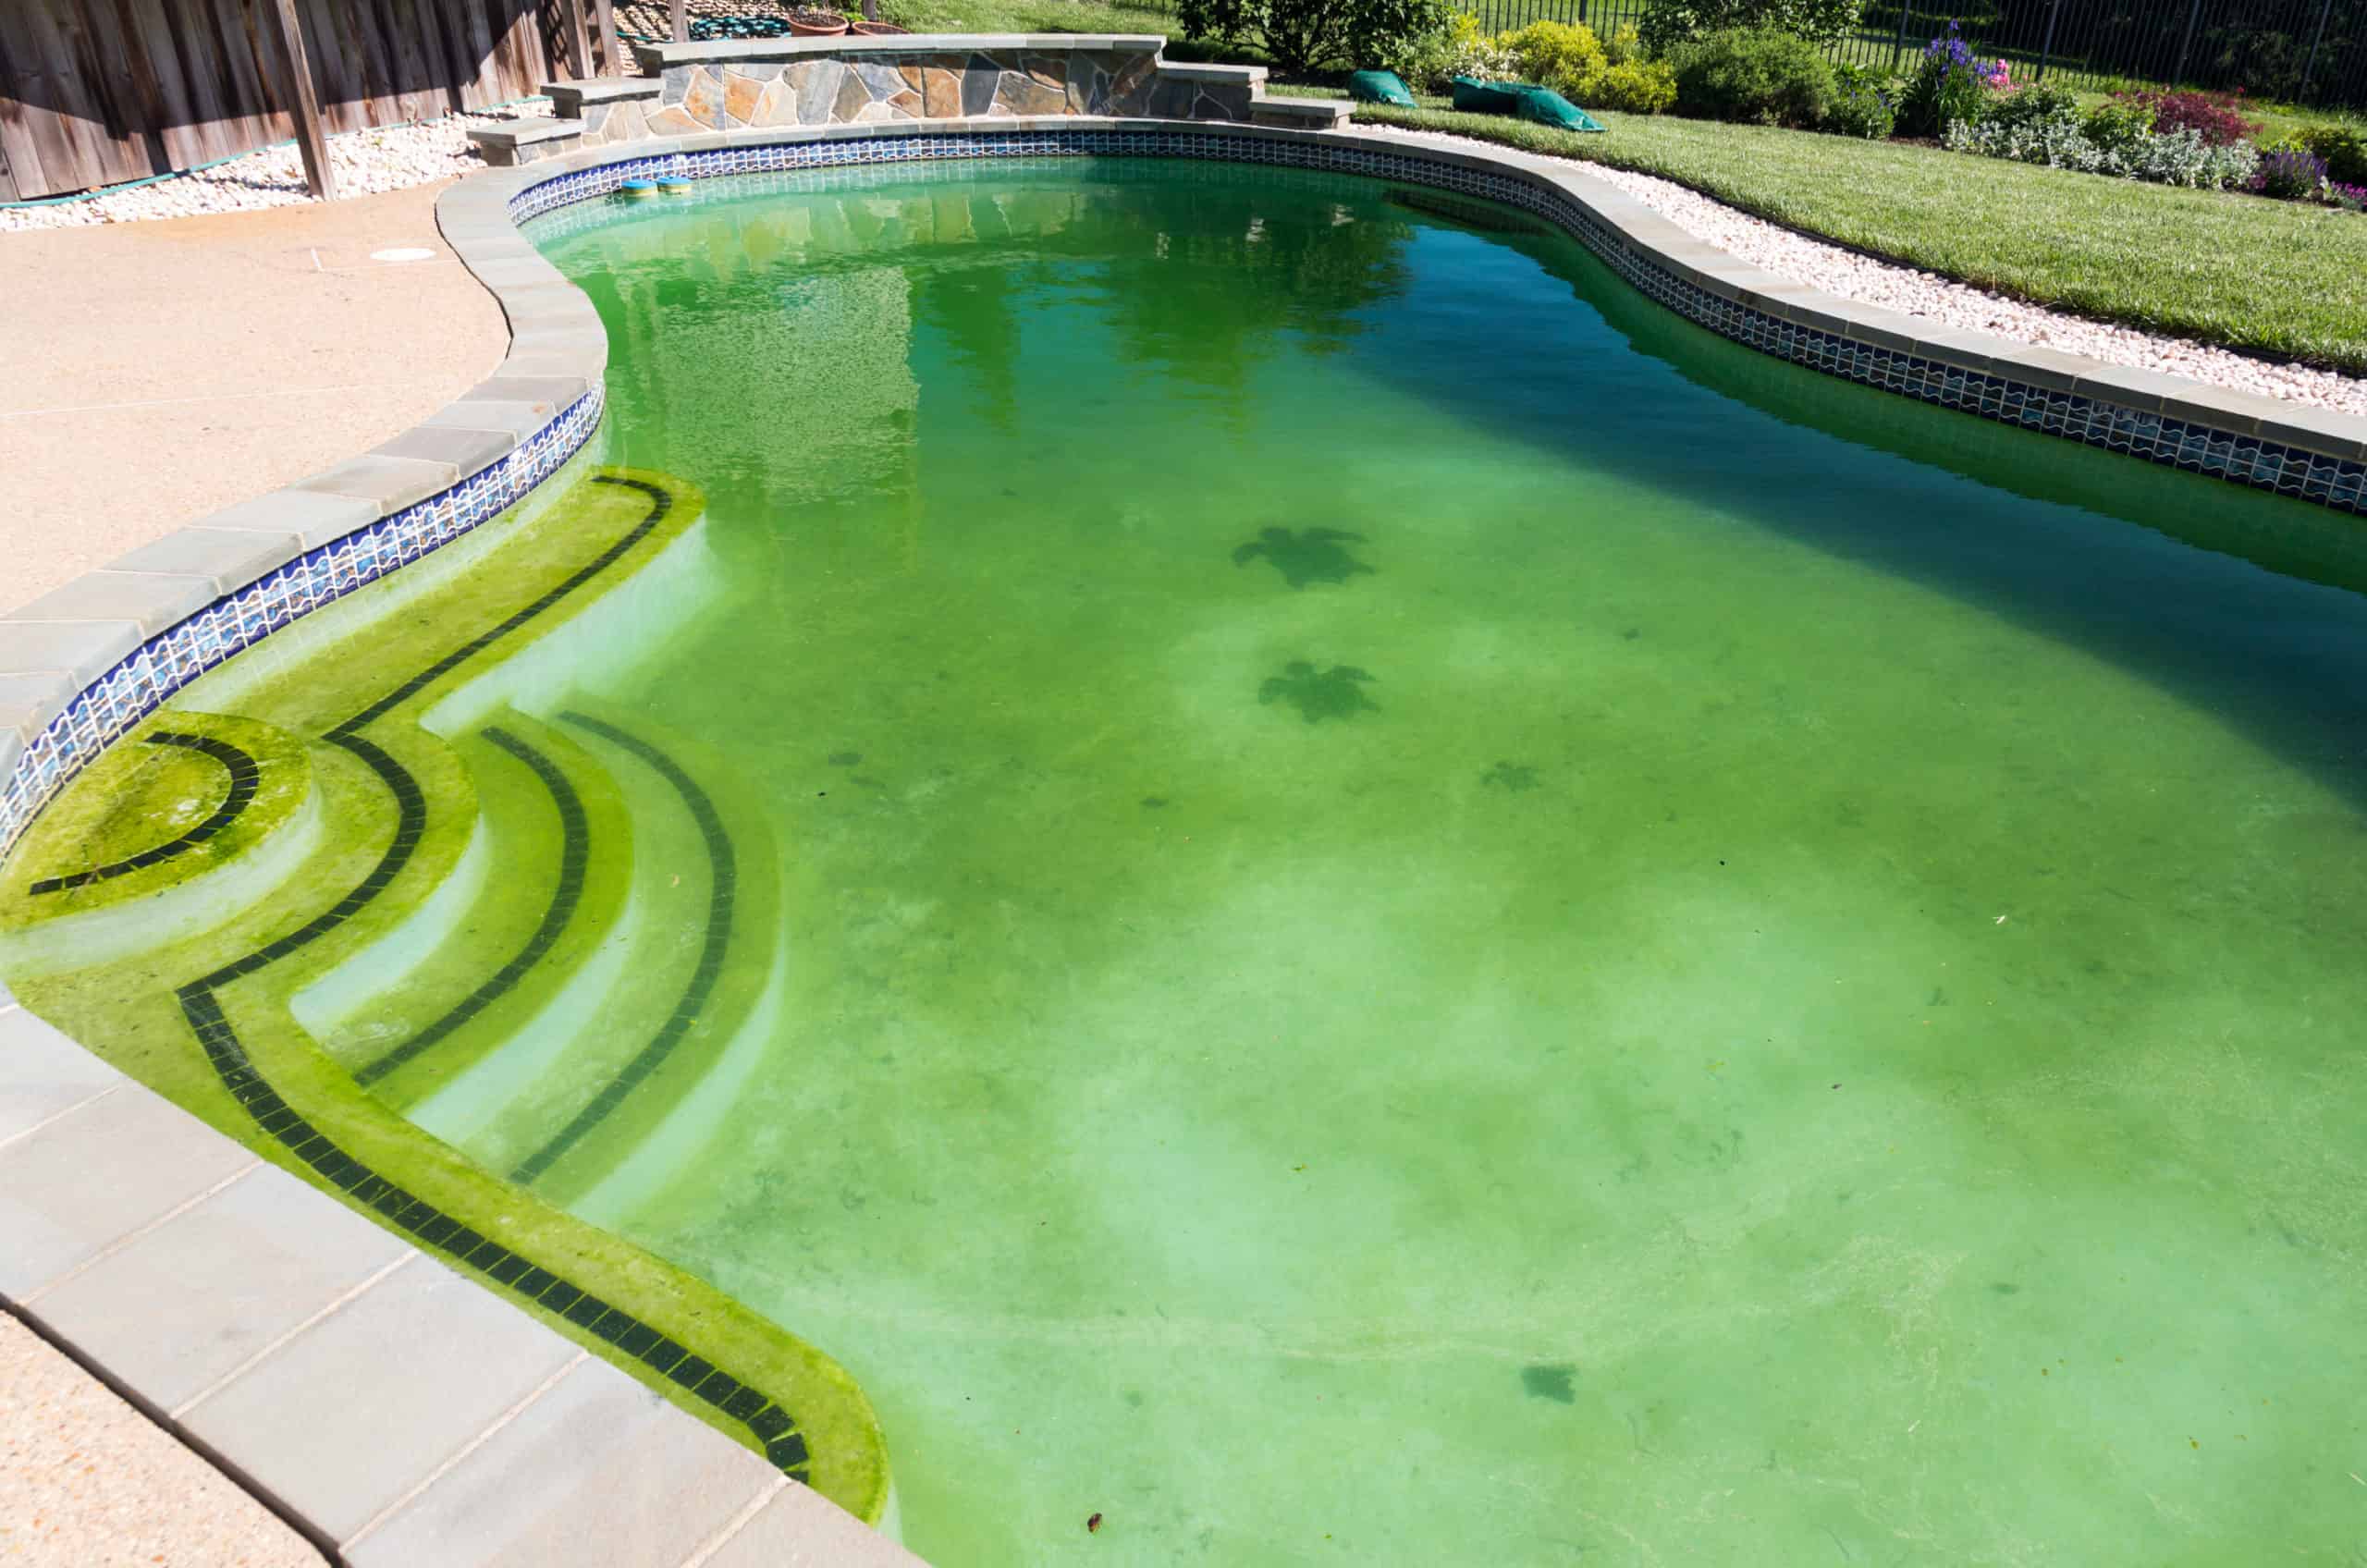 Back yard swimming pool behind modern single family home at pool opening with green stagnant algae-filled water before cleaning